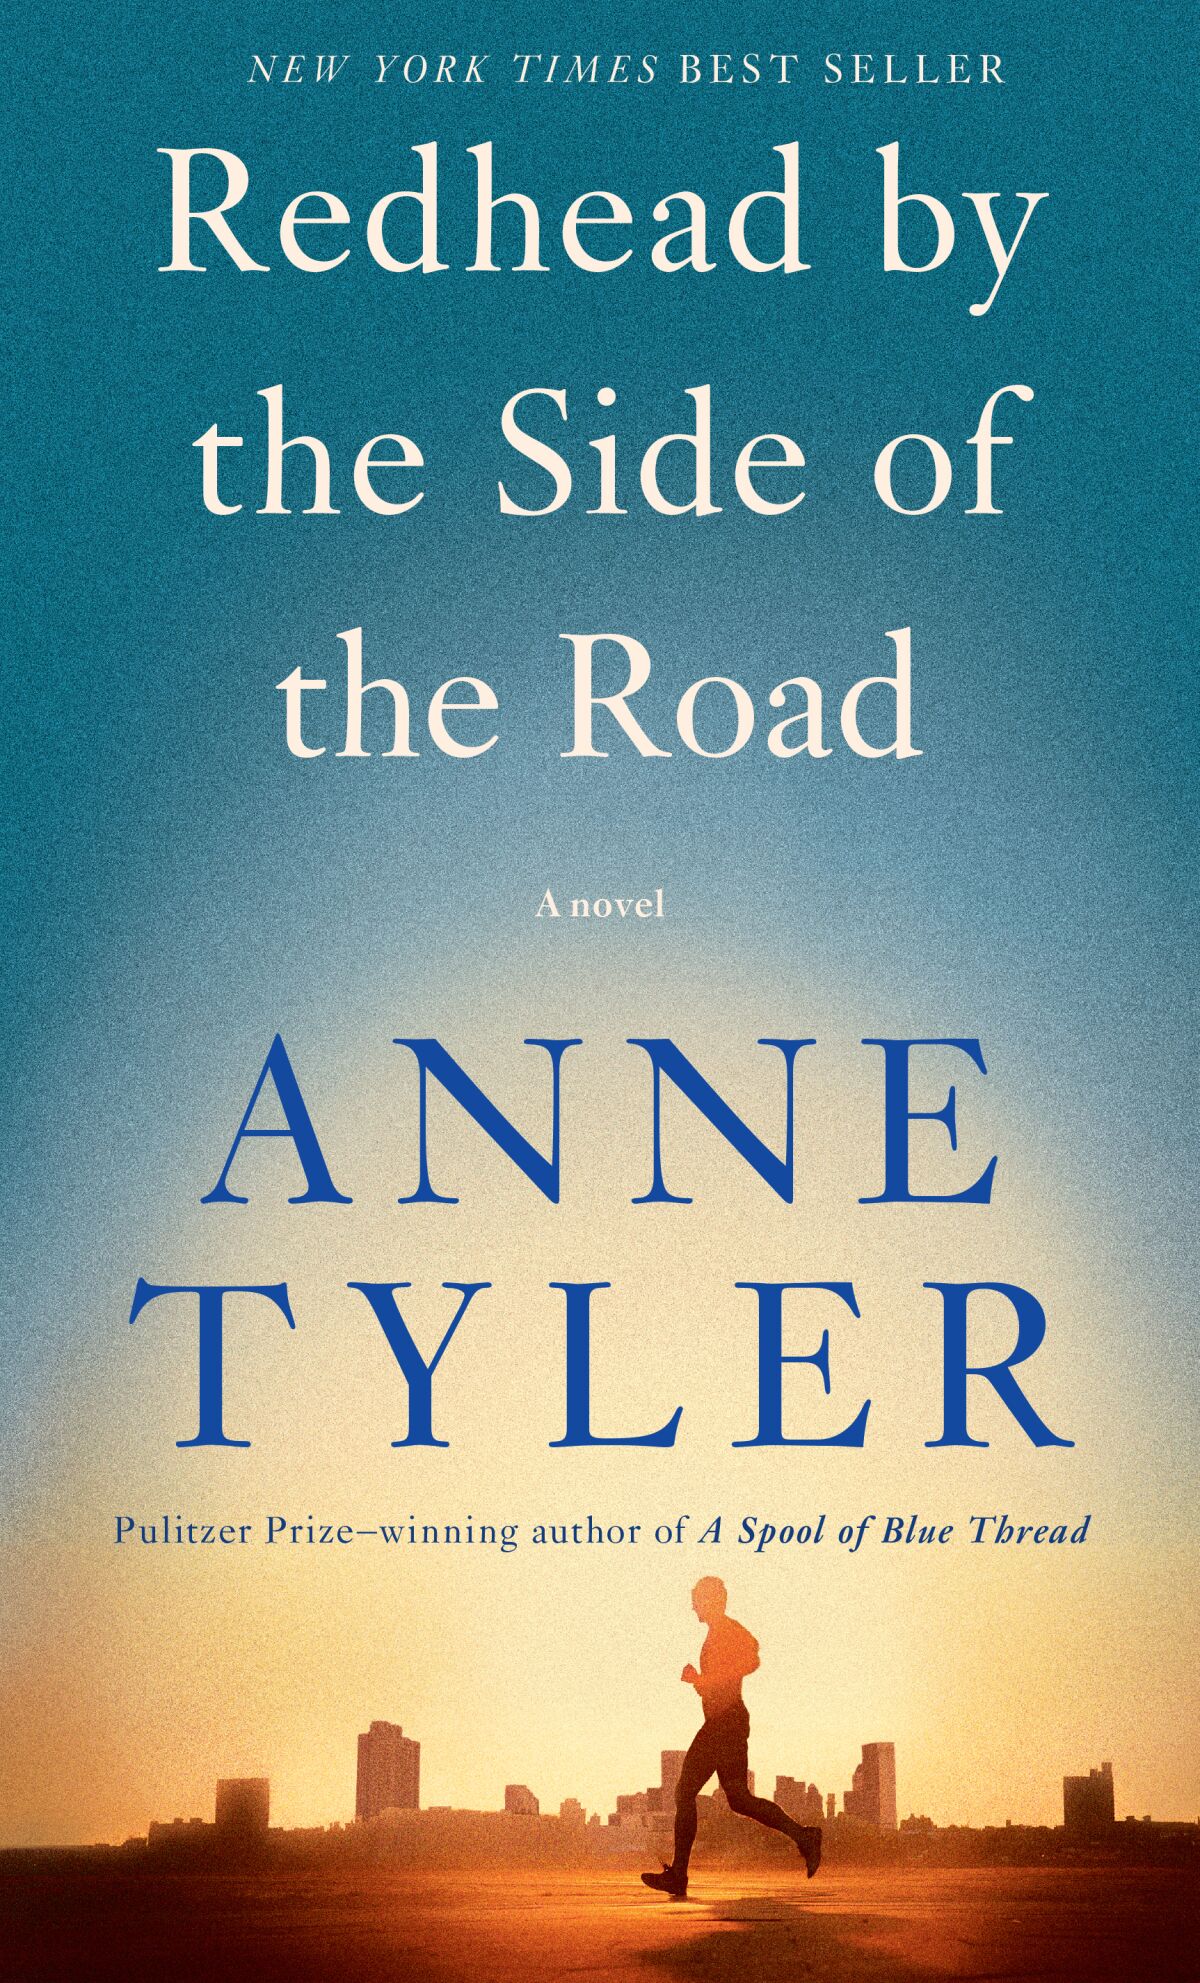 "Redhead by the Side of the Road” by Anne Tyler.